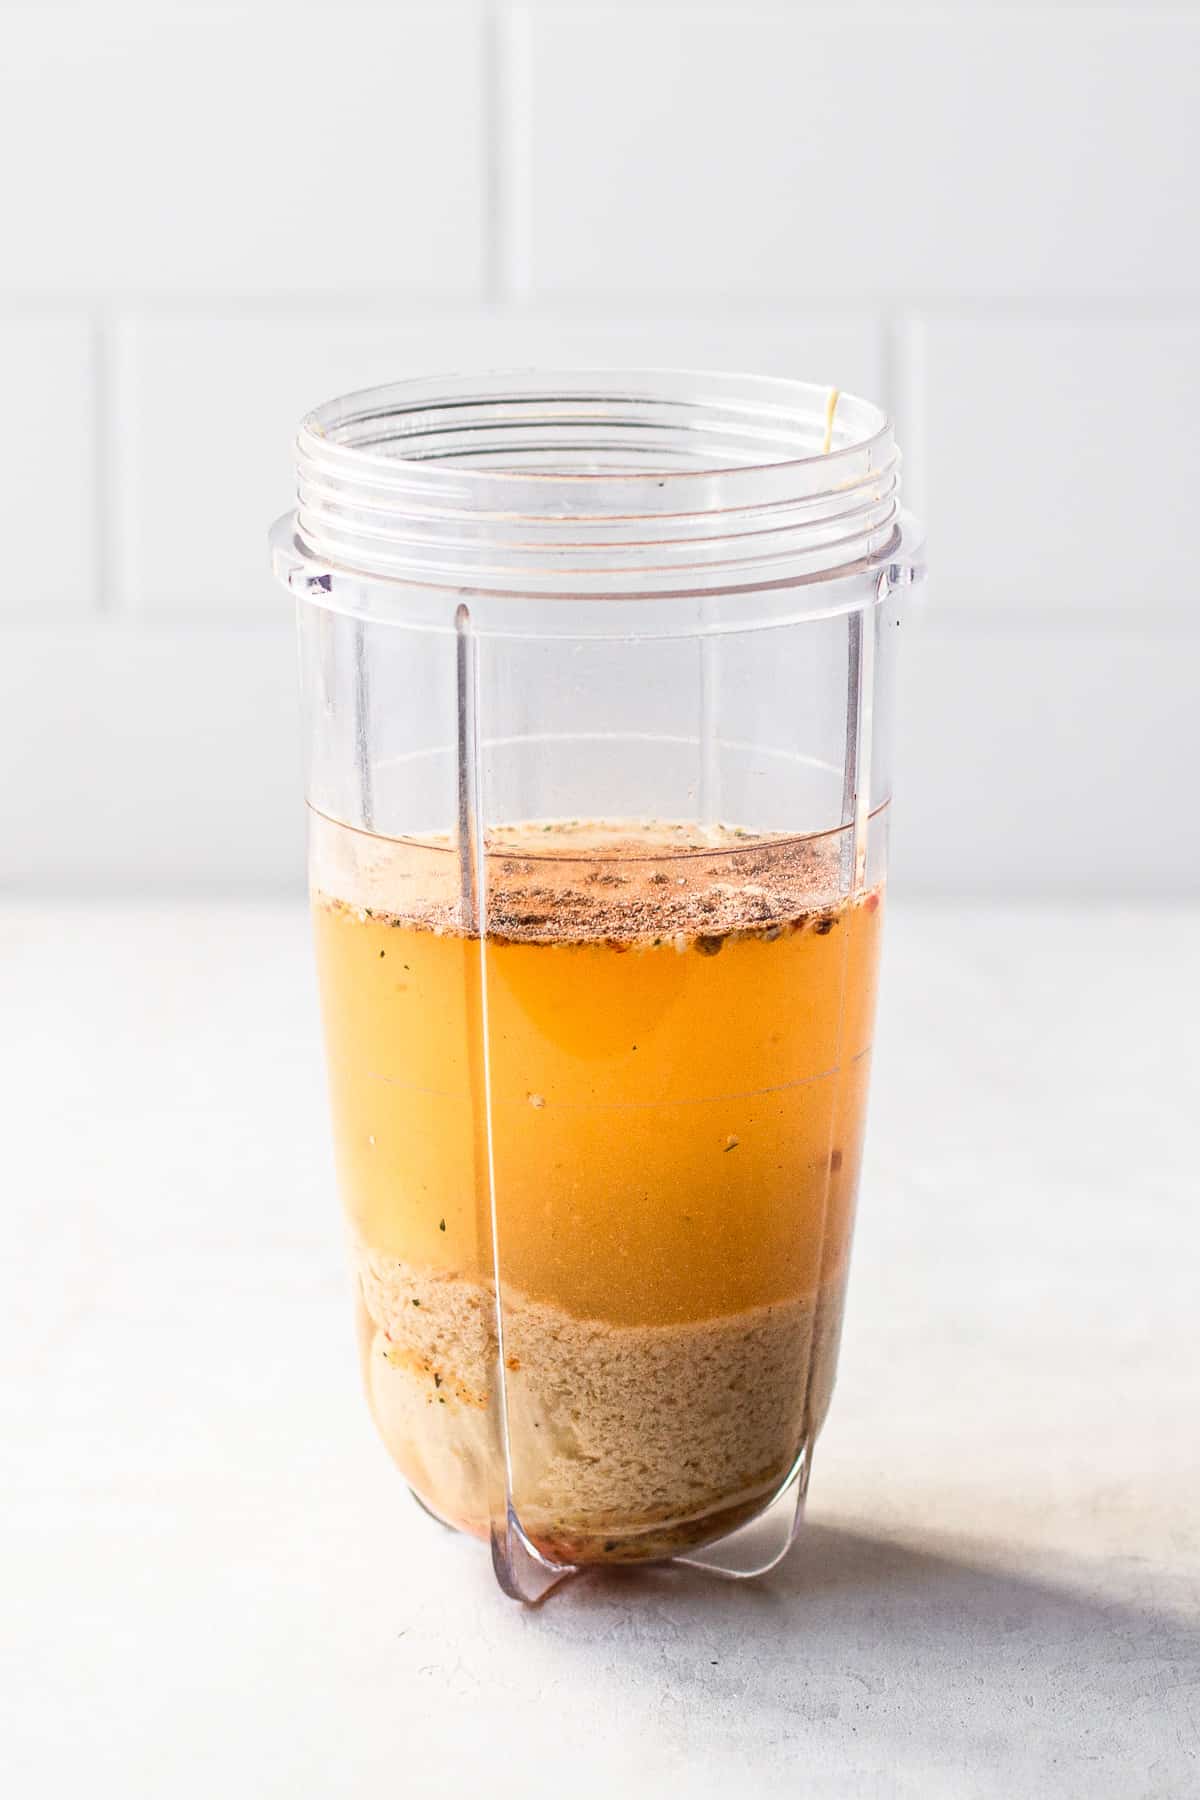 Vegetable broth, cashew butter and nutritional yeast in a small blender container.